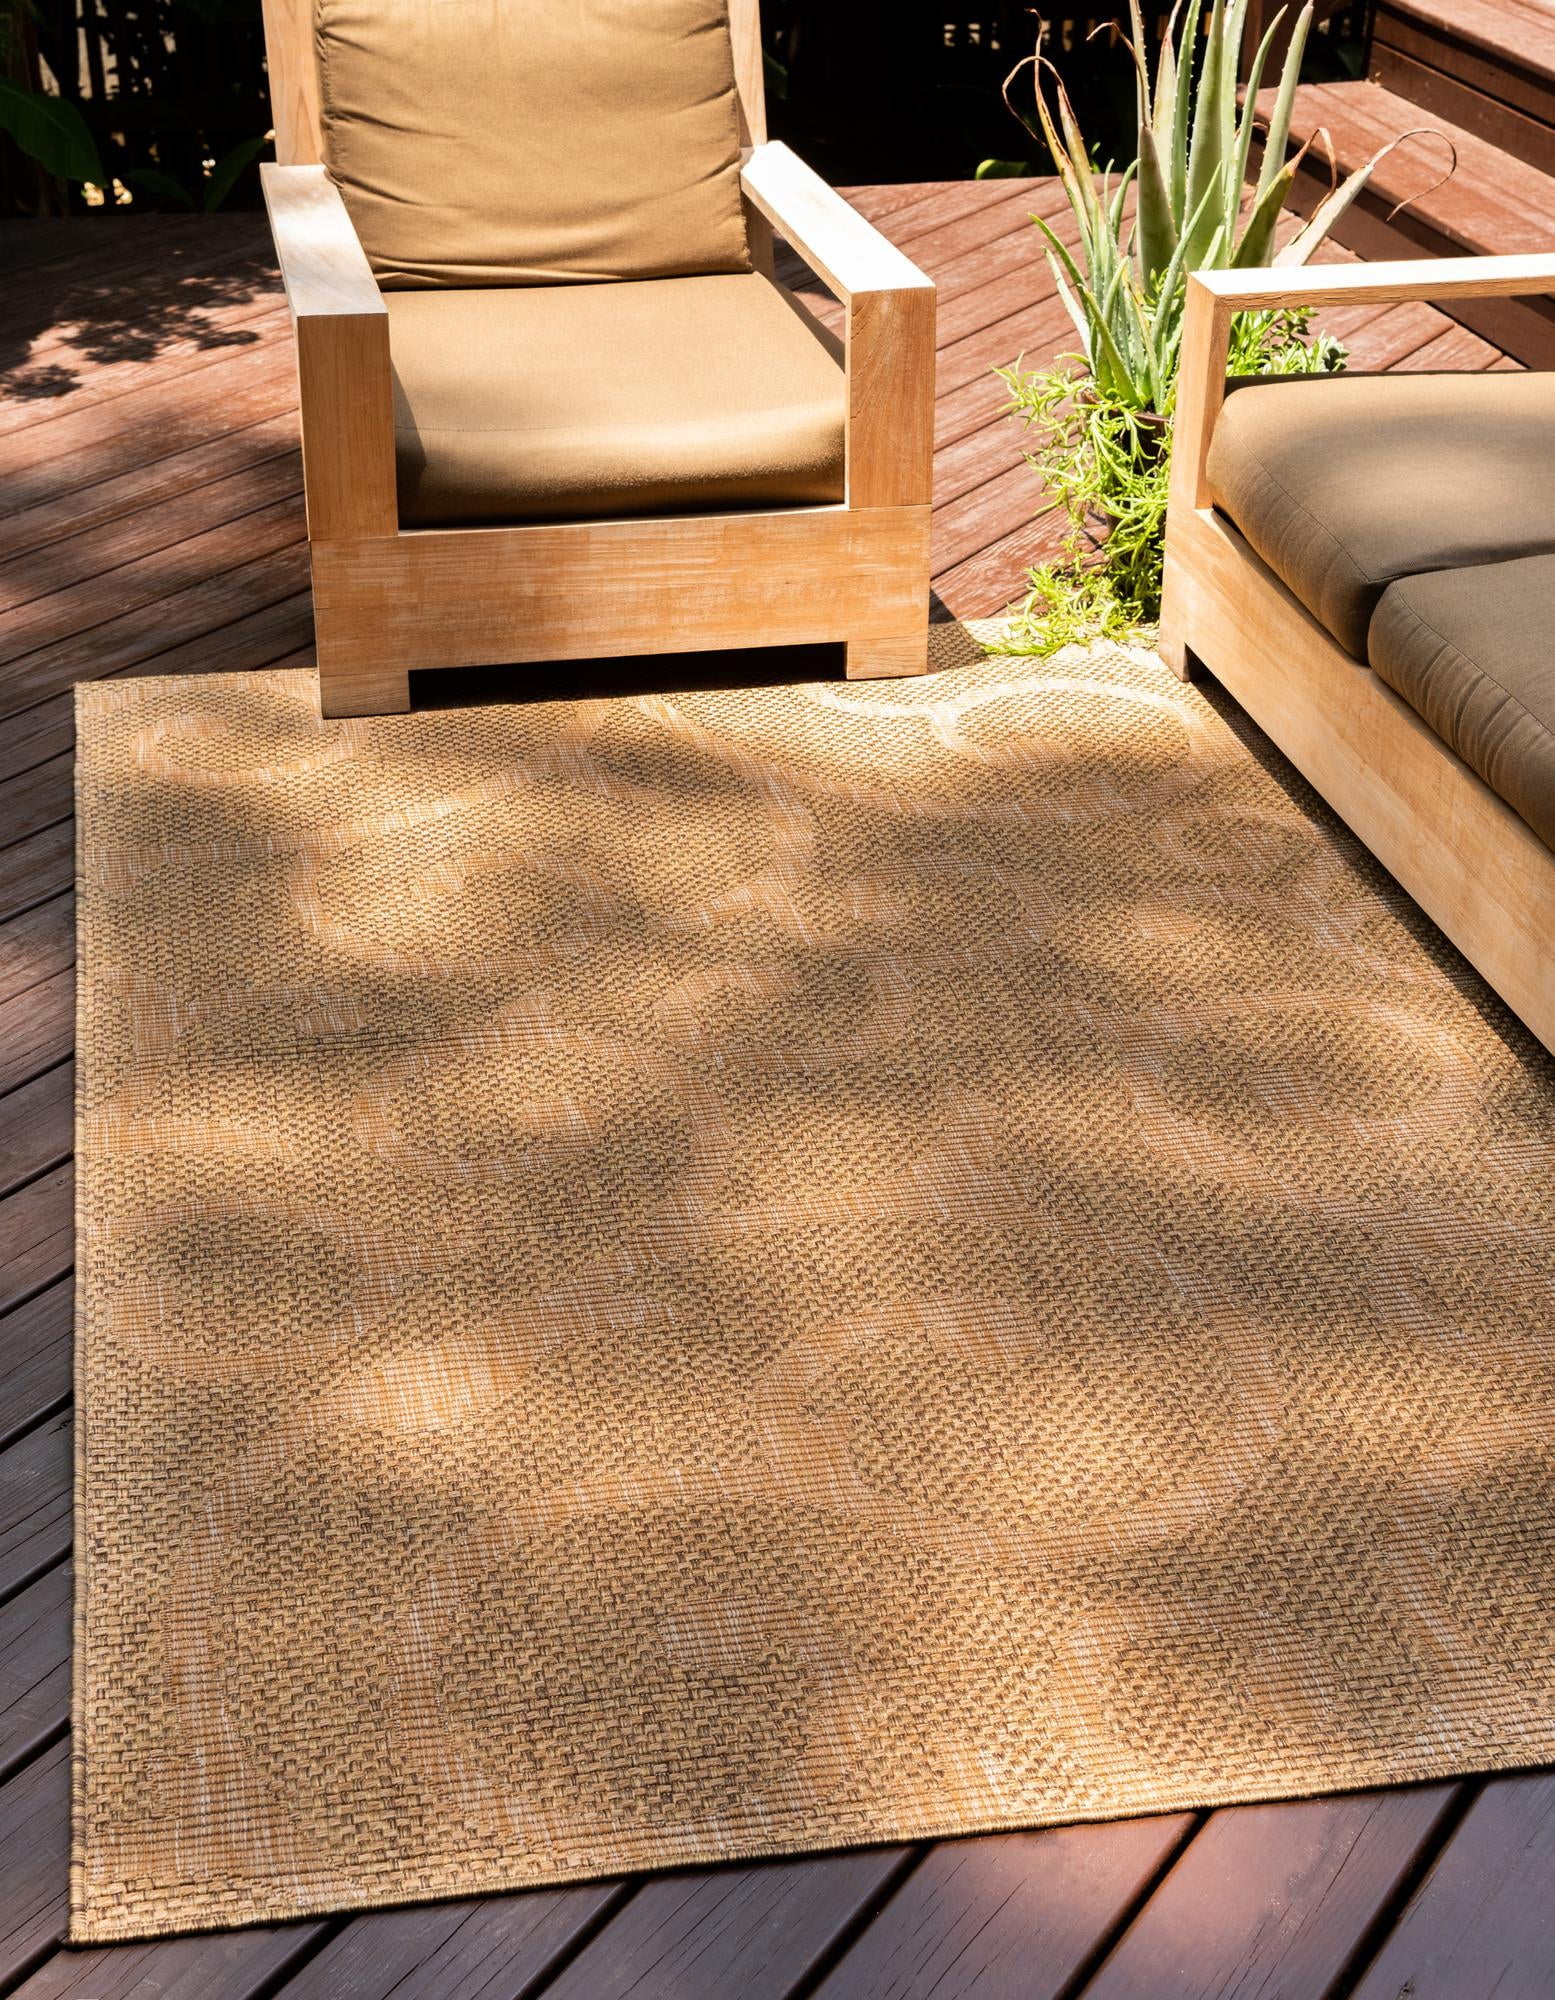 Boat Rugs & Carpet, Stylish Options for Outdoors or Indoors